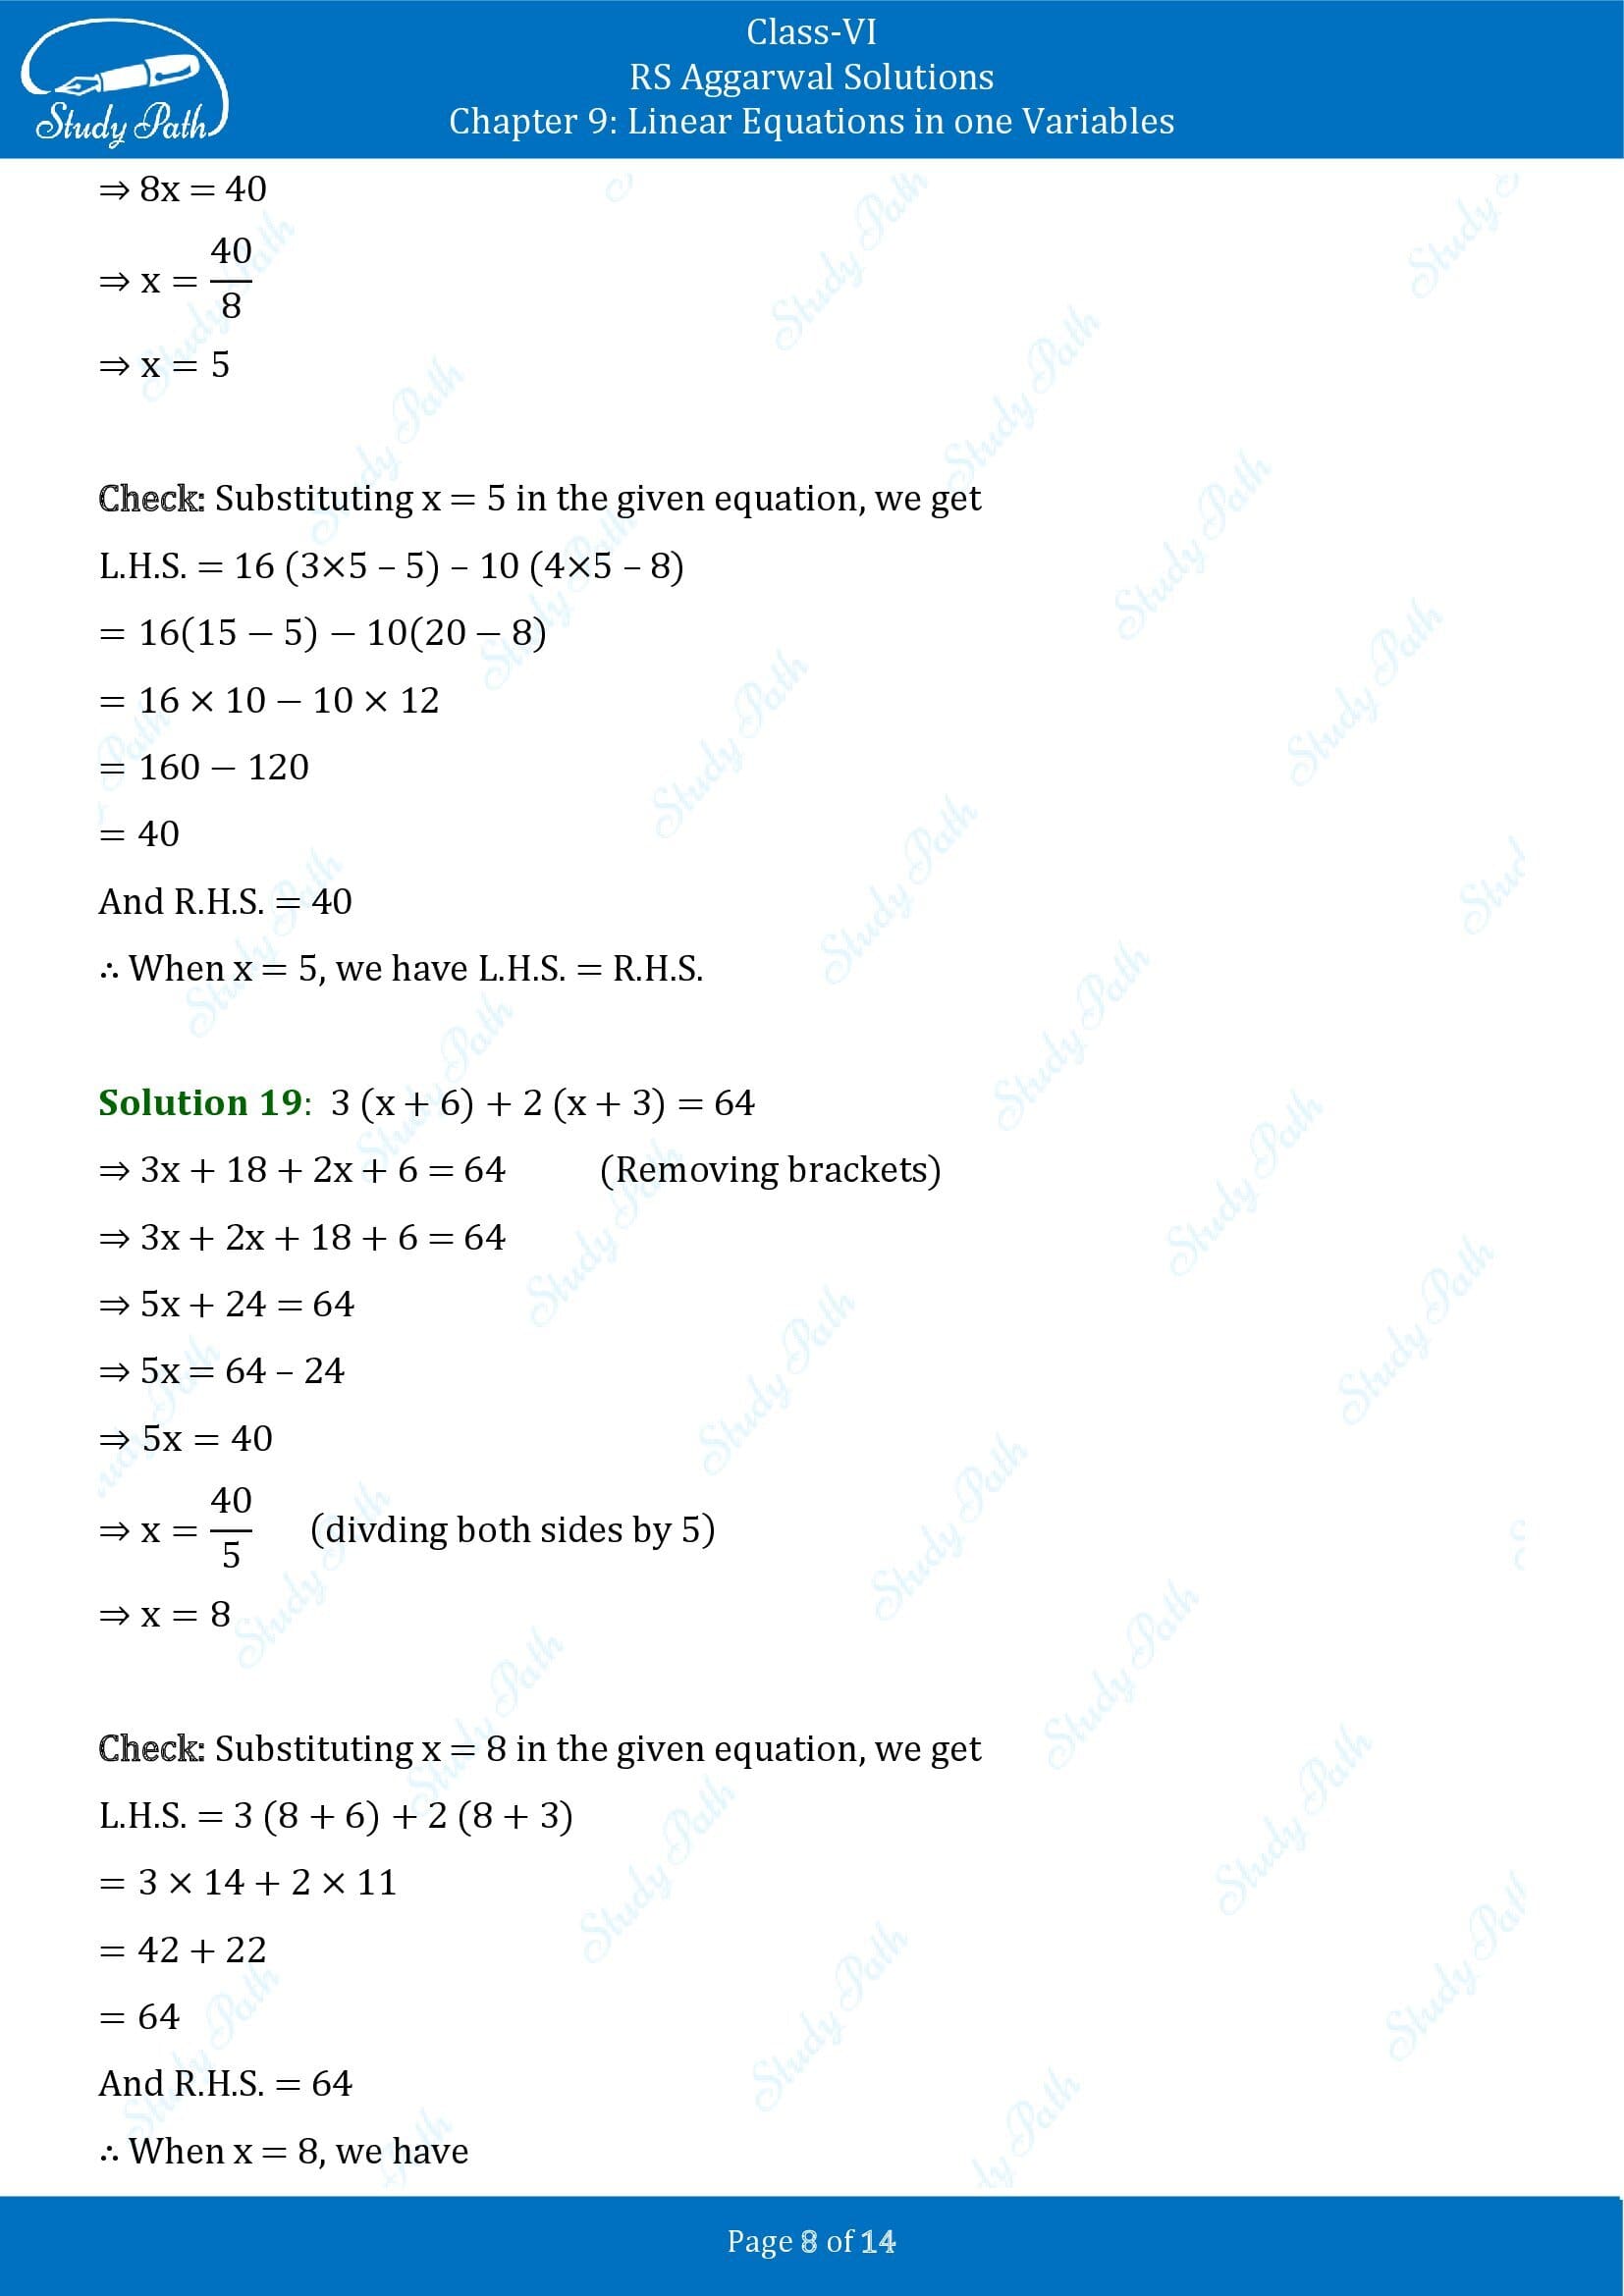 RS Aggarwal Solutions Class 6 Chapter 9 Linear Equations in One Variable Exercise 9B 00008